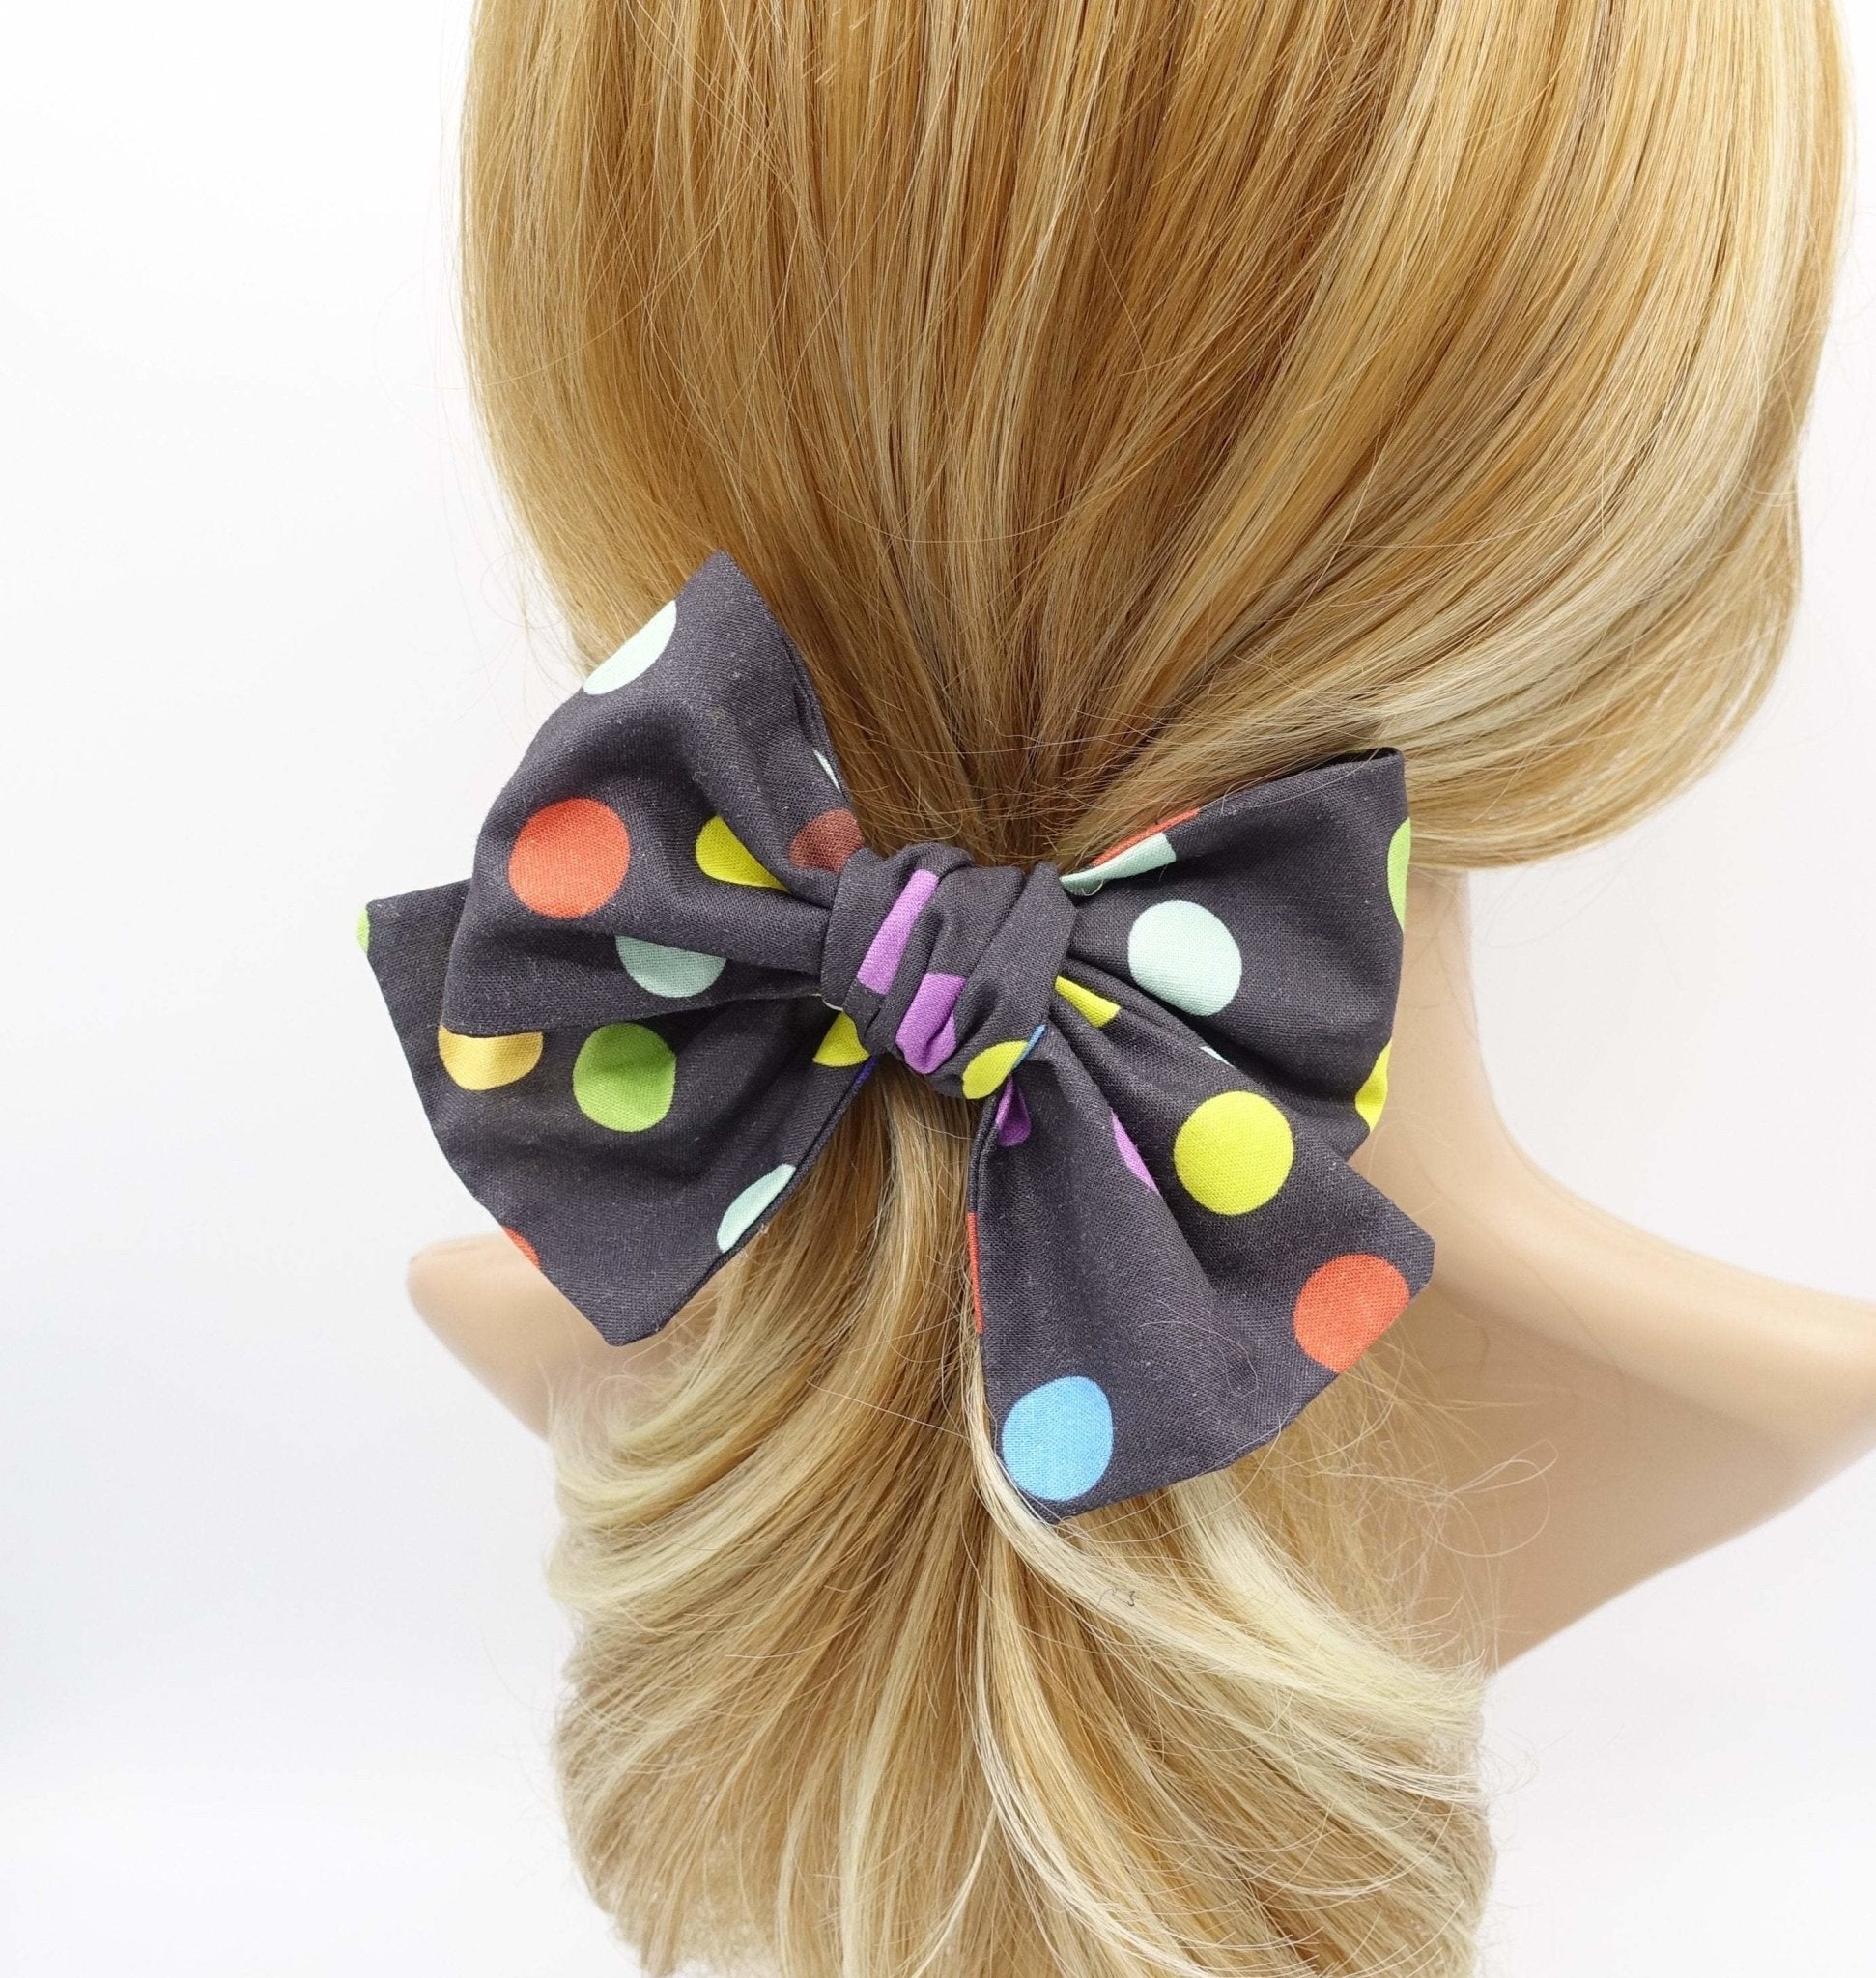 veryshine.com Barrettes & Clips Black cotton dot hair bow colorful wired hair accessory for women